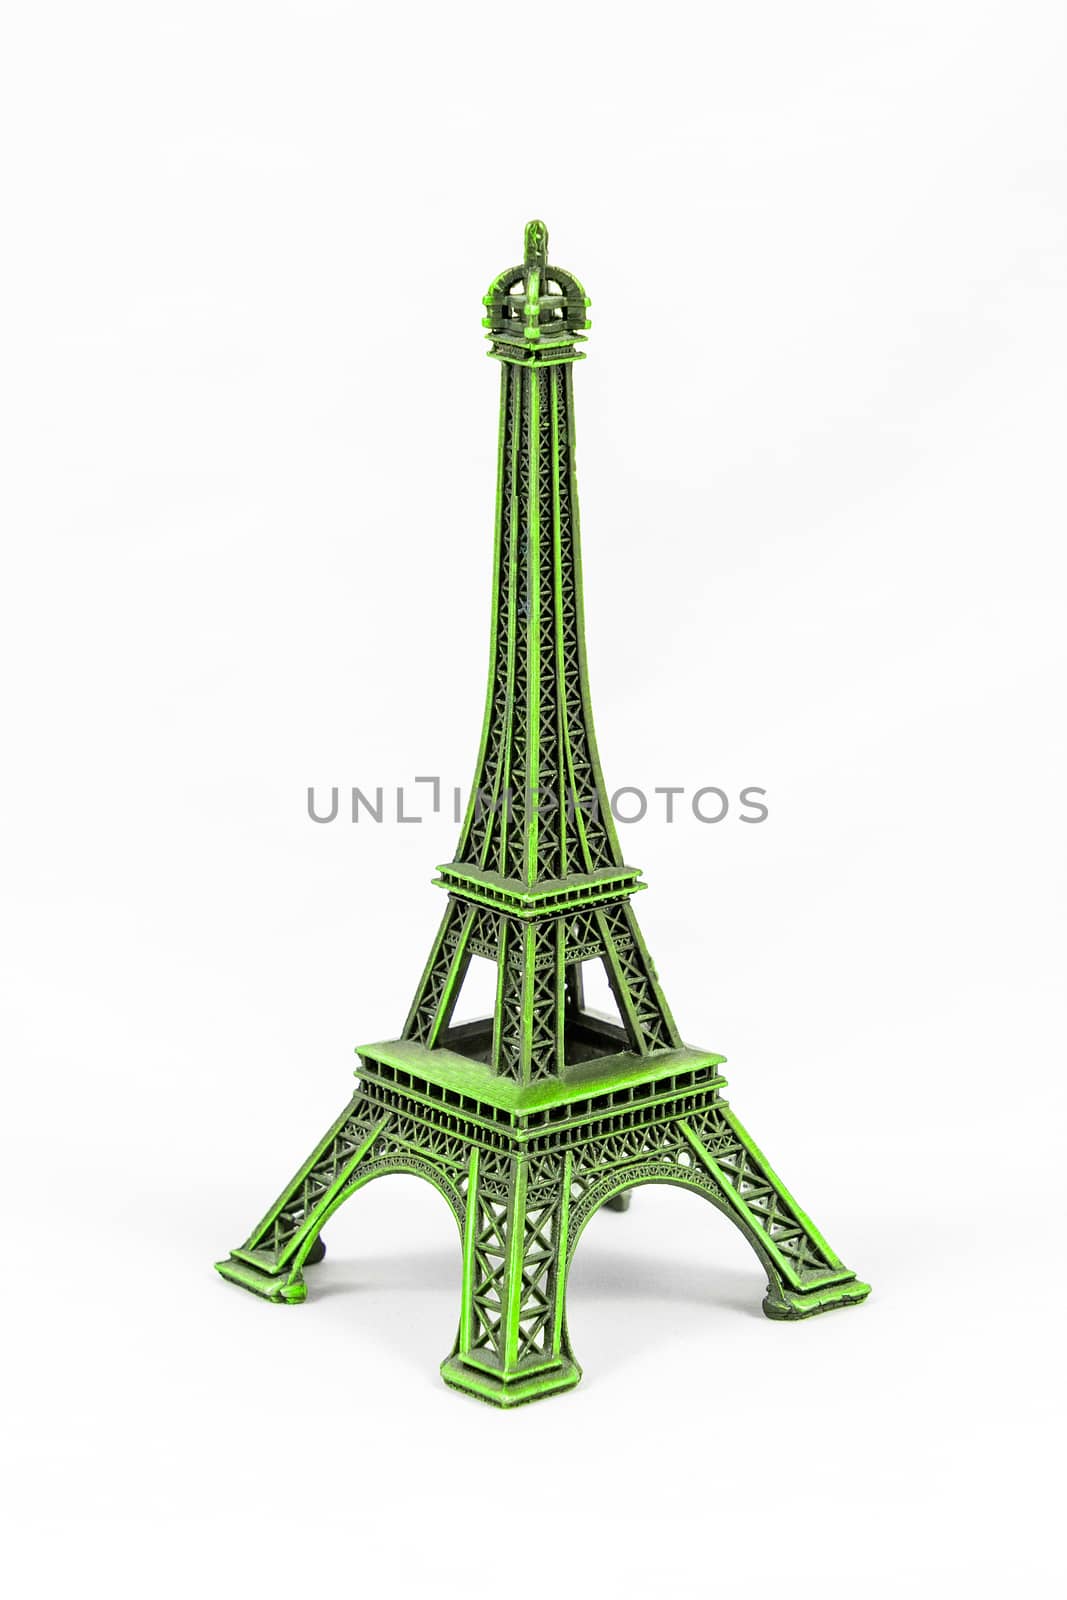 Green Eiffel Tower model, isolated on white background by marcorubino